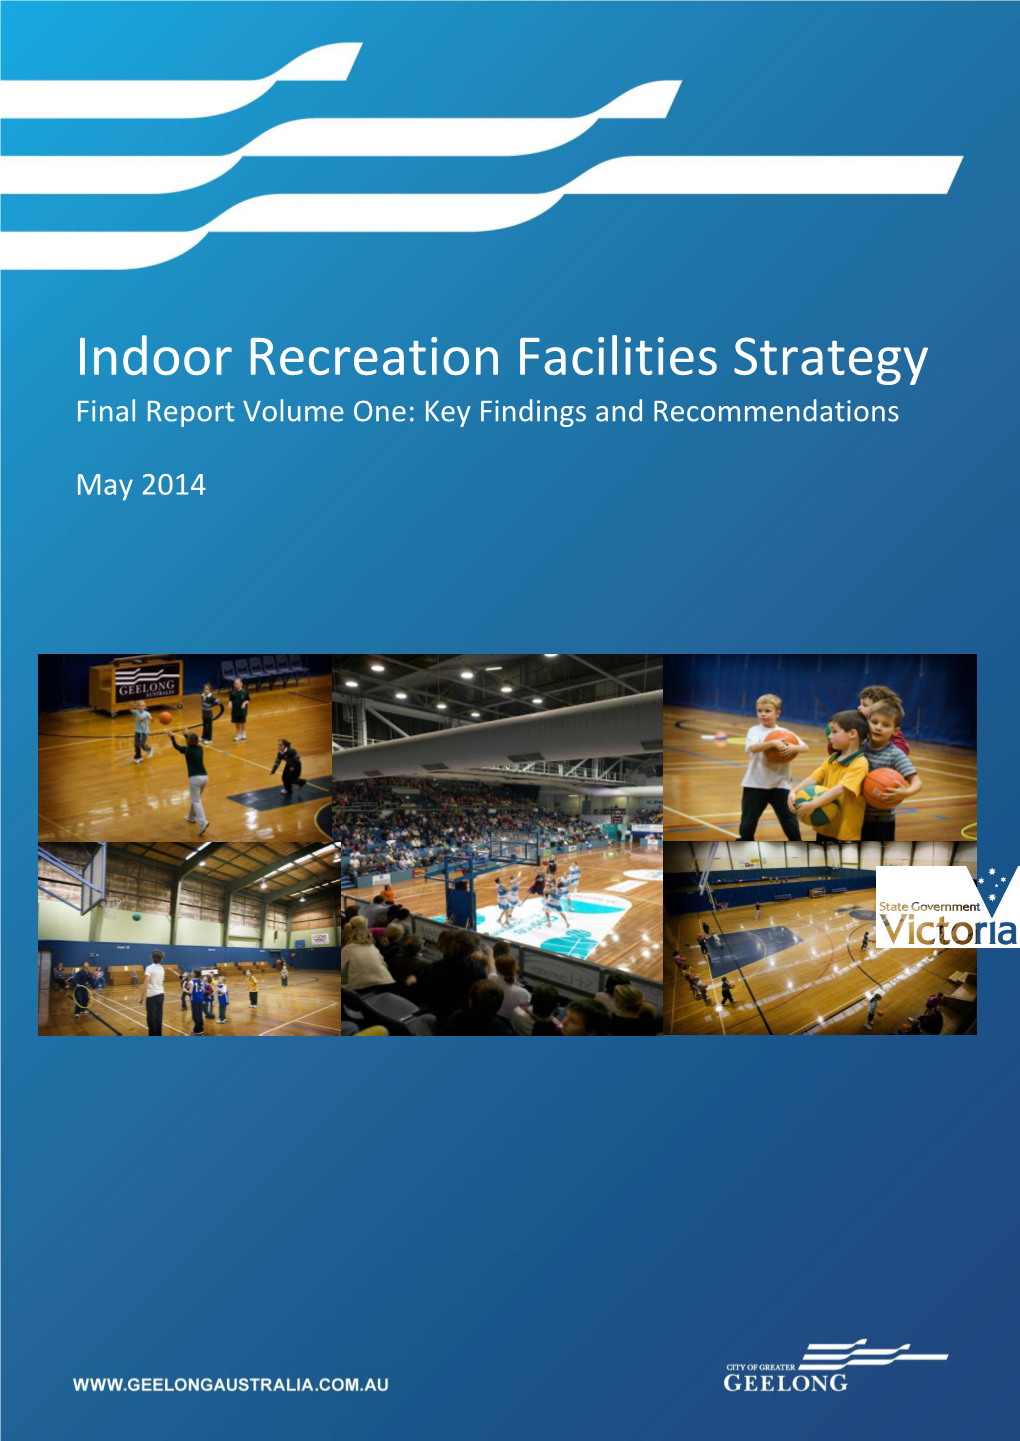 Final Report Volume One: Key Findings and Recommendations